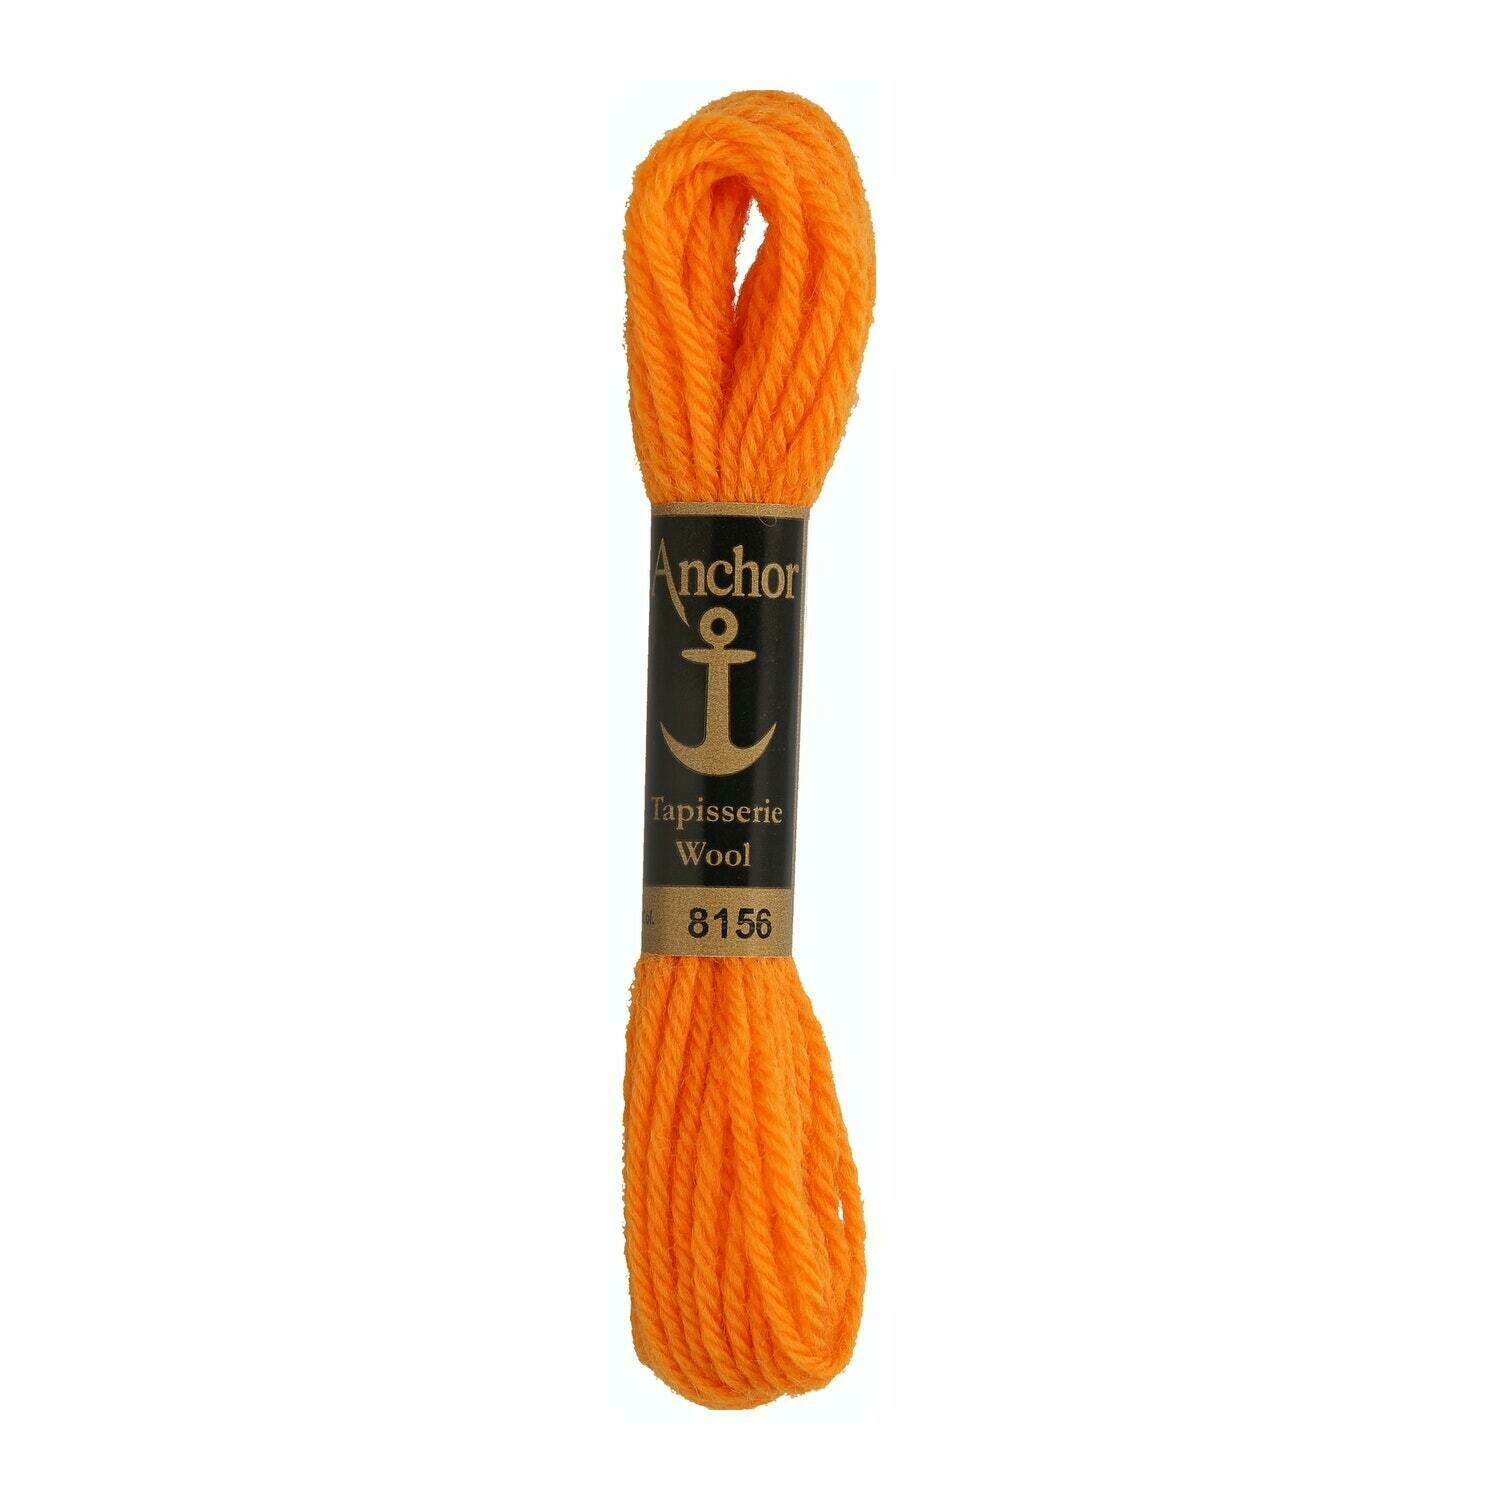 Anchor Tapisserie Wool #08156